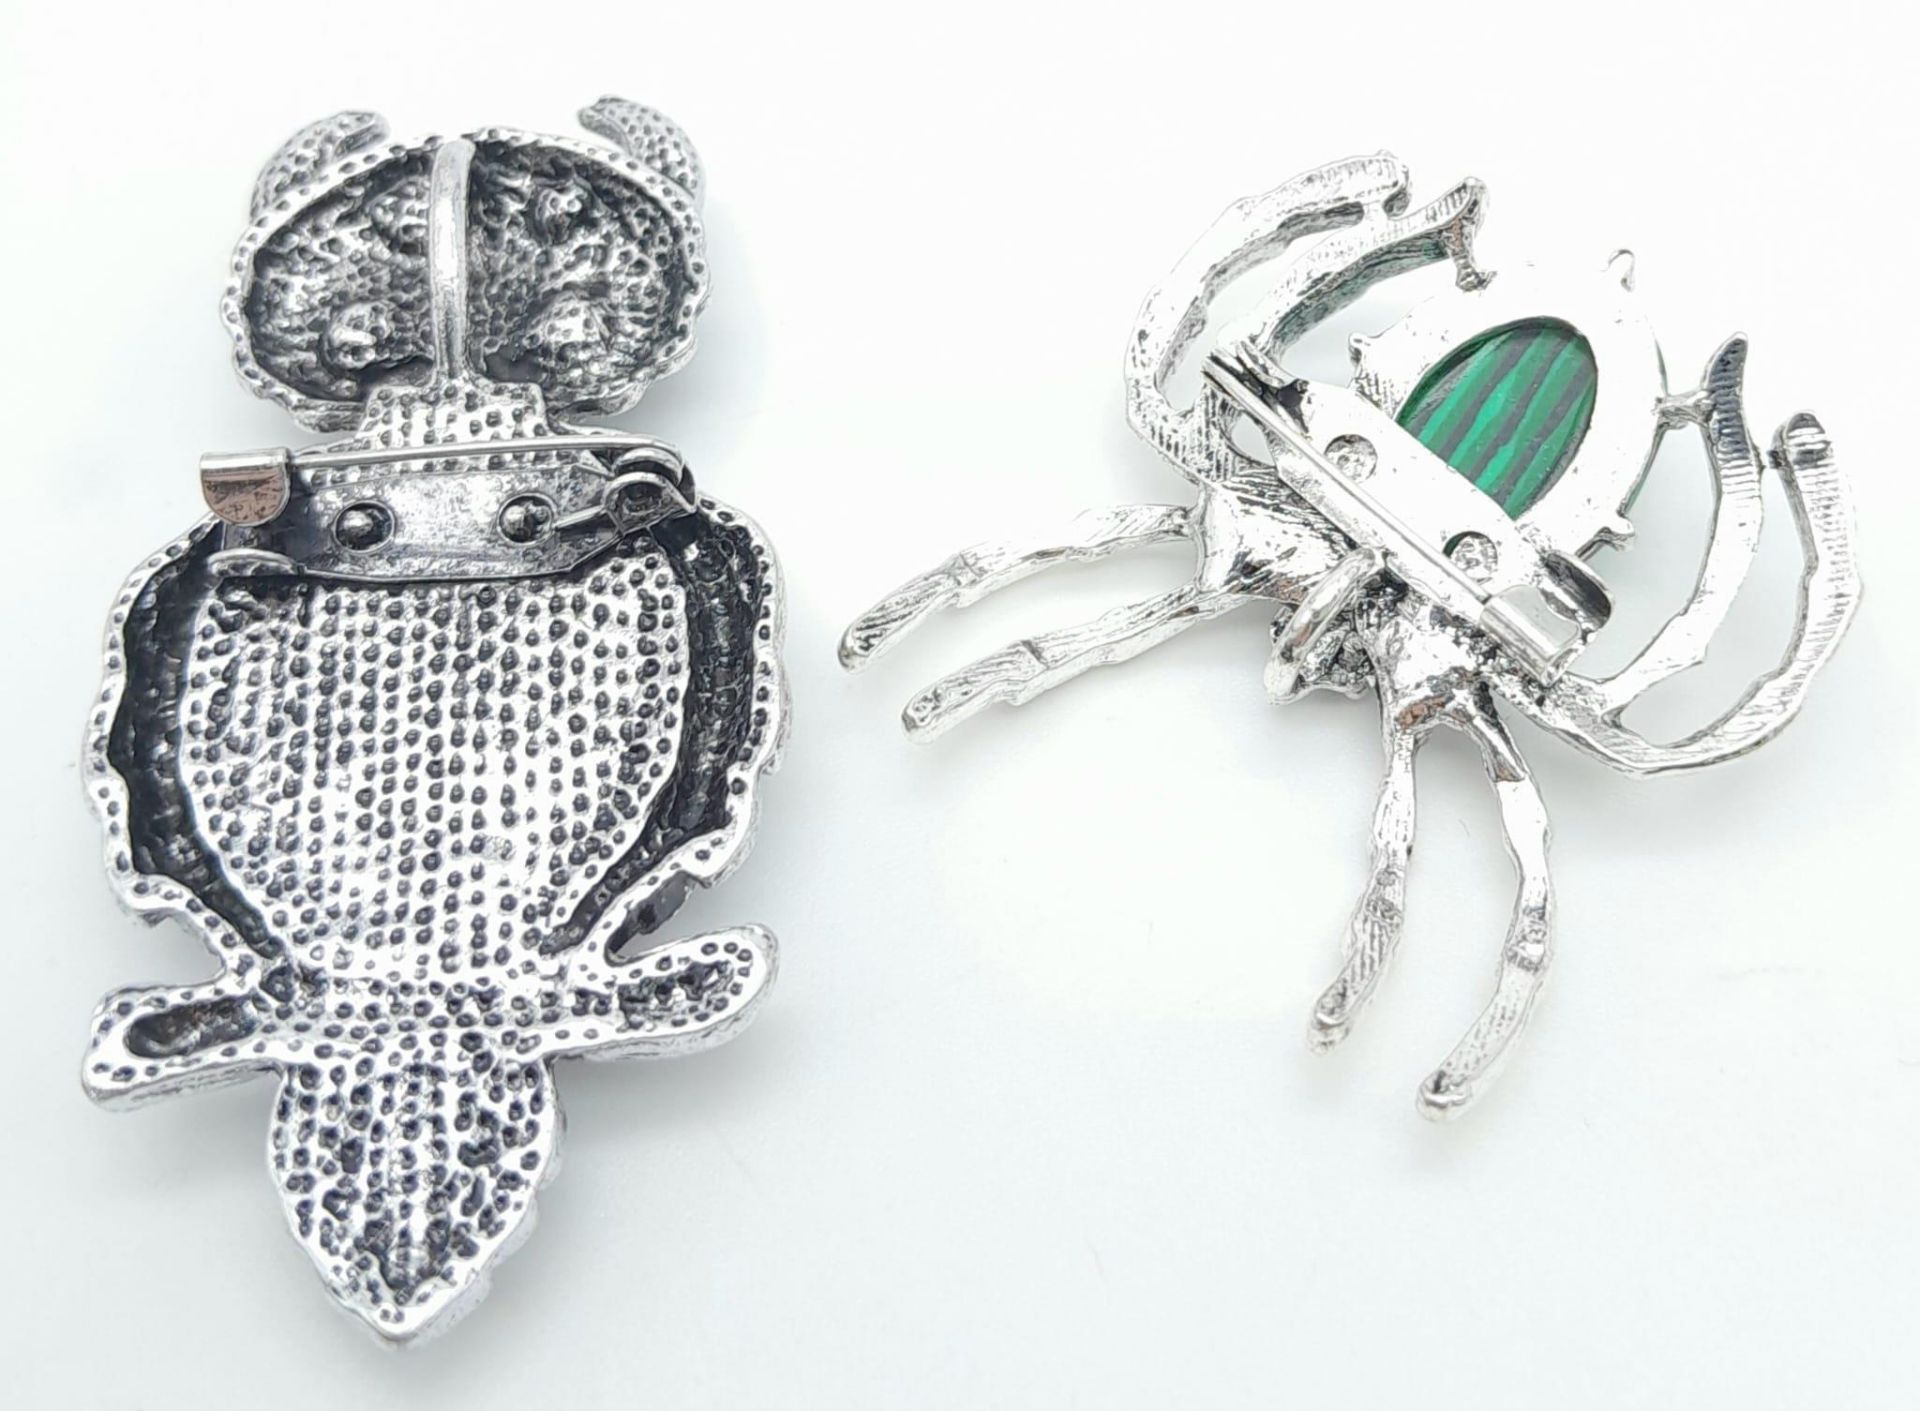 A Marcasite Spider and a Tigers Eye Owl Brooch. Owl - 6cm. - Image 3 of 5